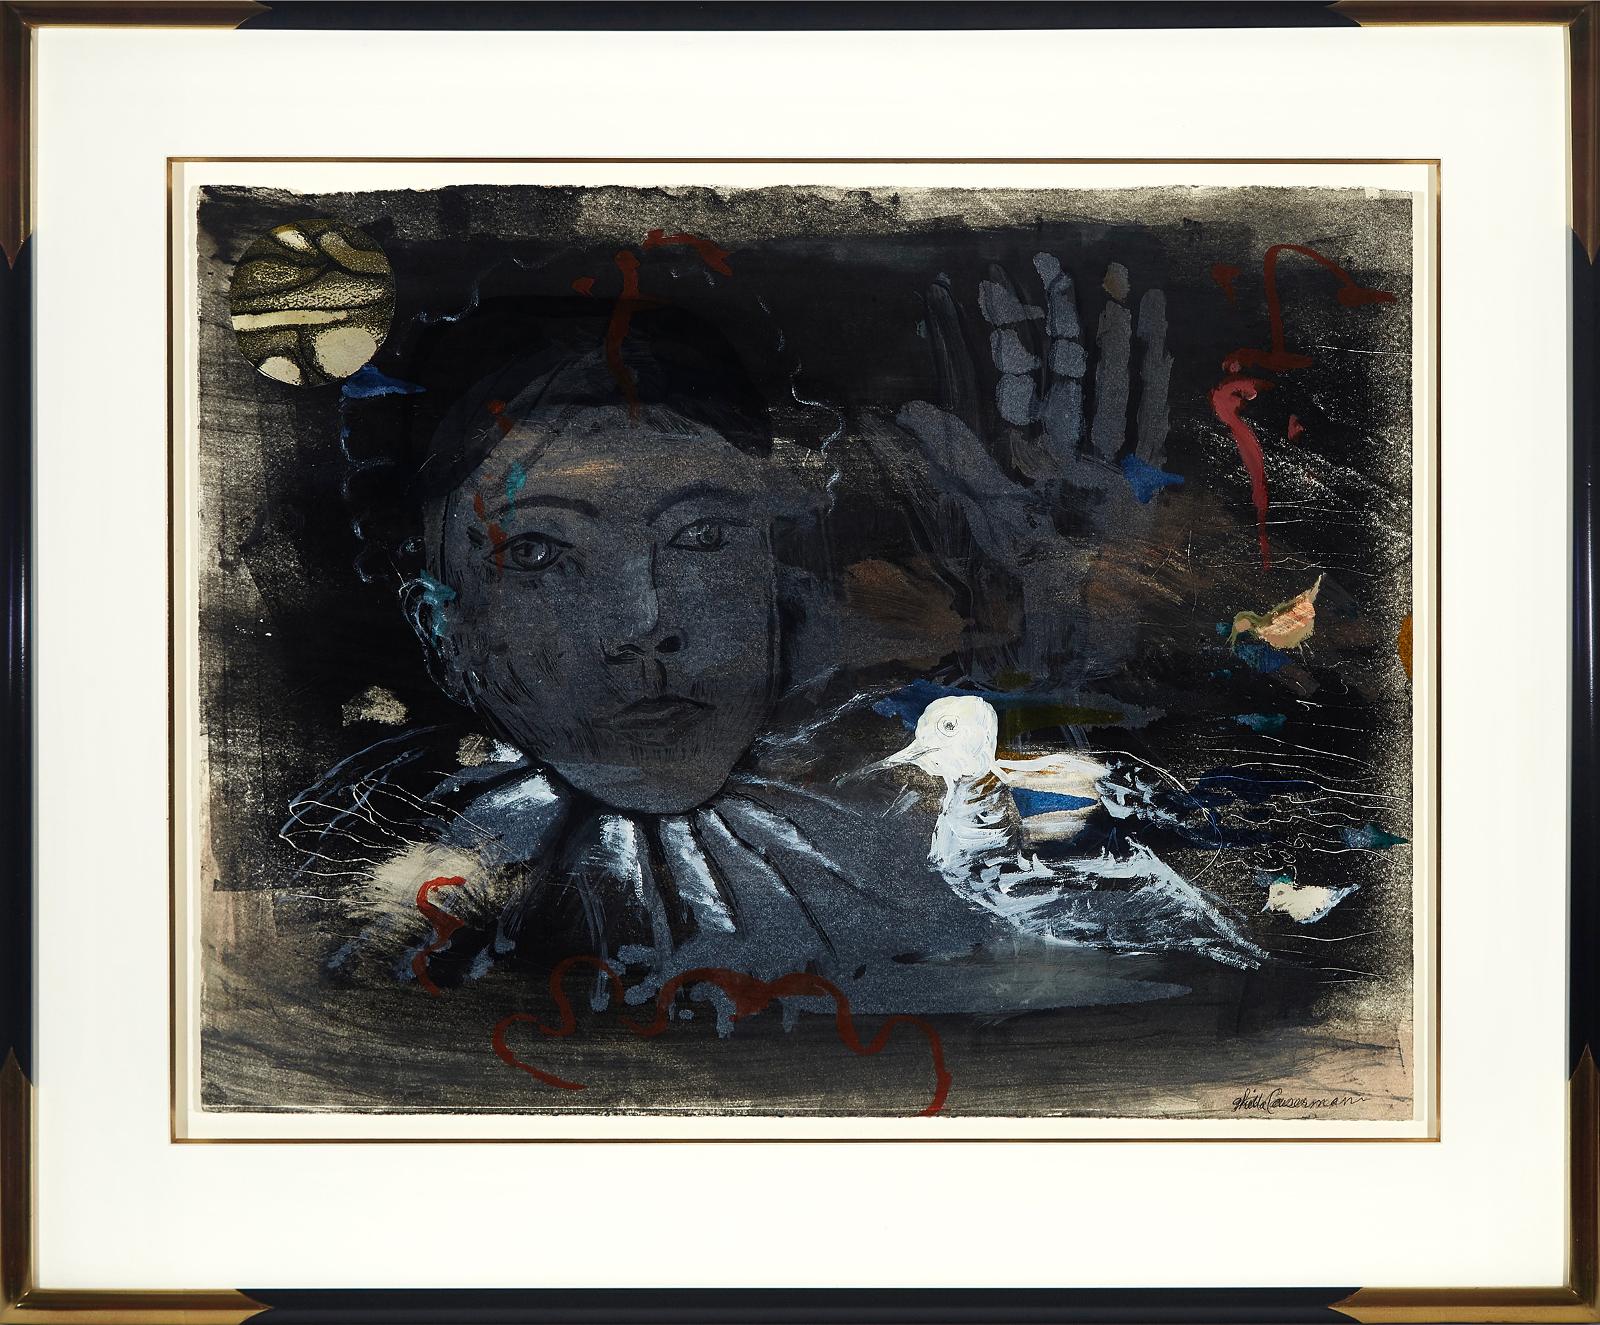 Ghitta Caiserman-Roth (1923-2005) - Untitled (Face Of Pierrot And Birds)